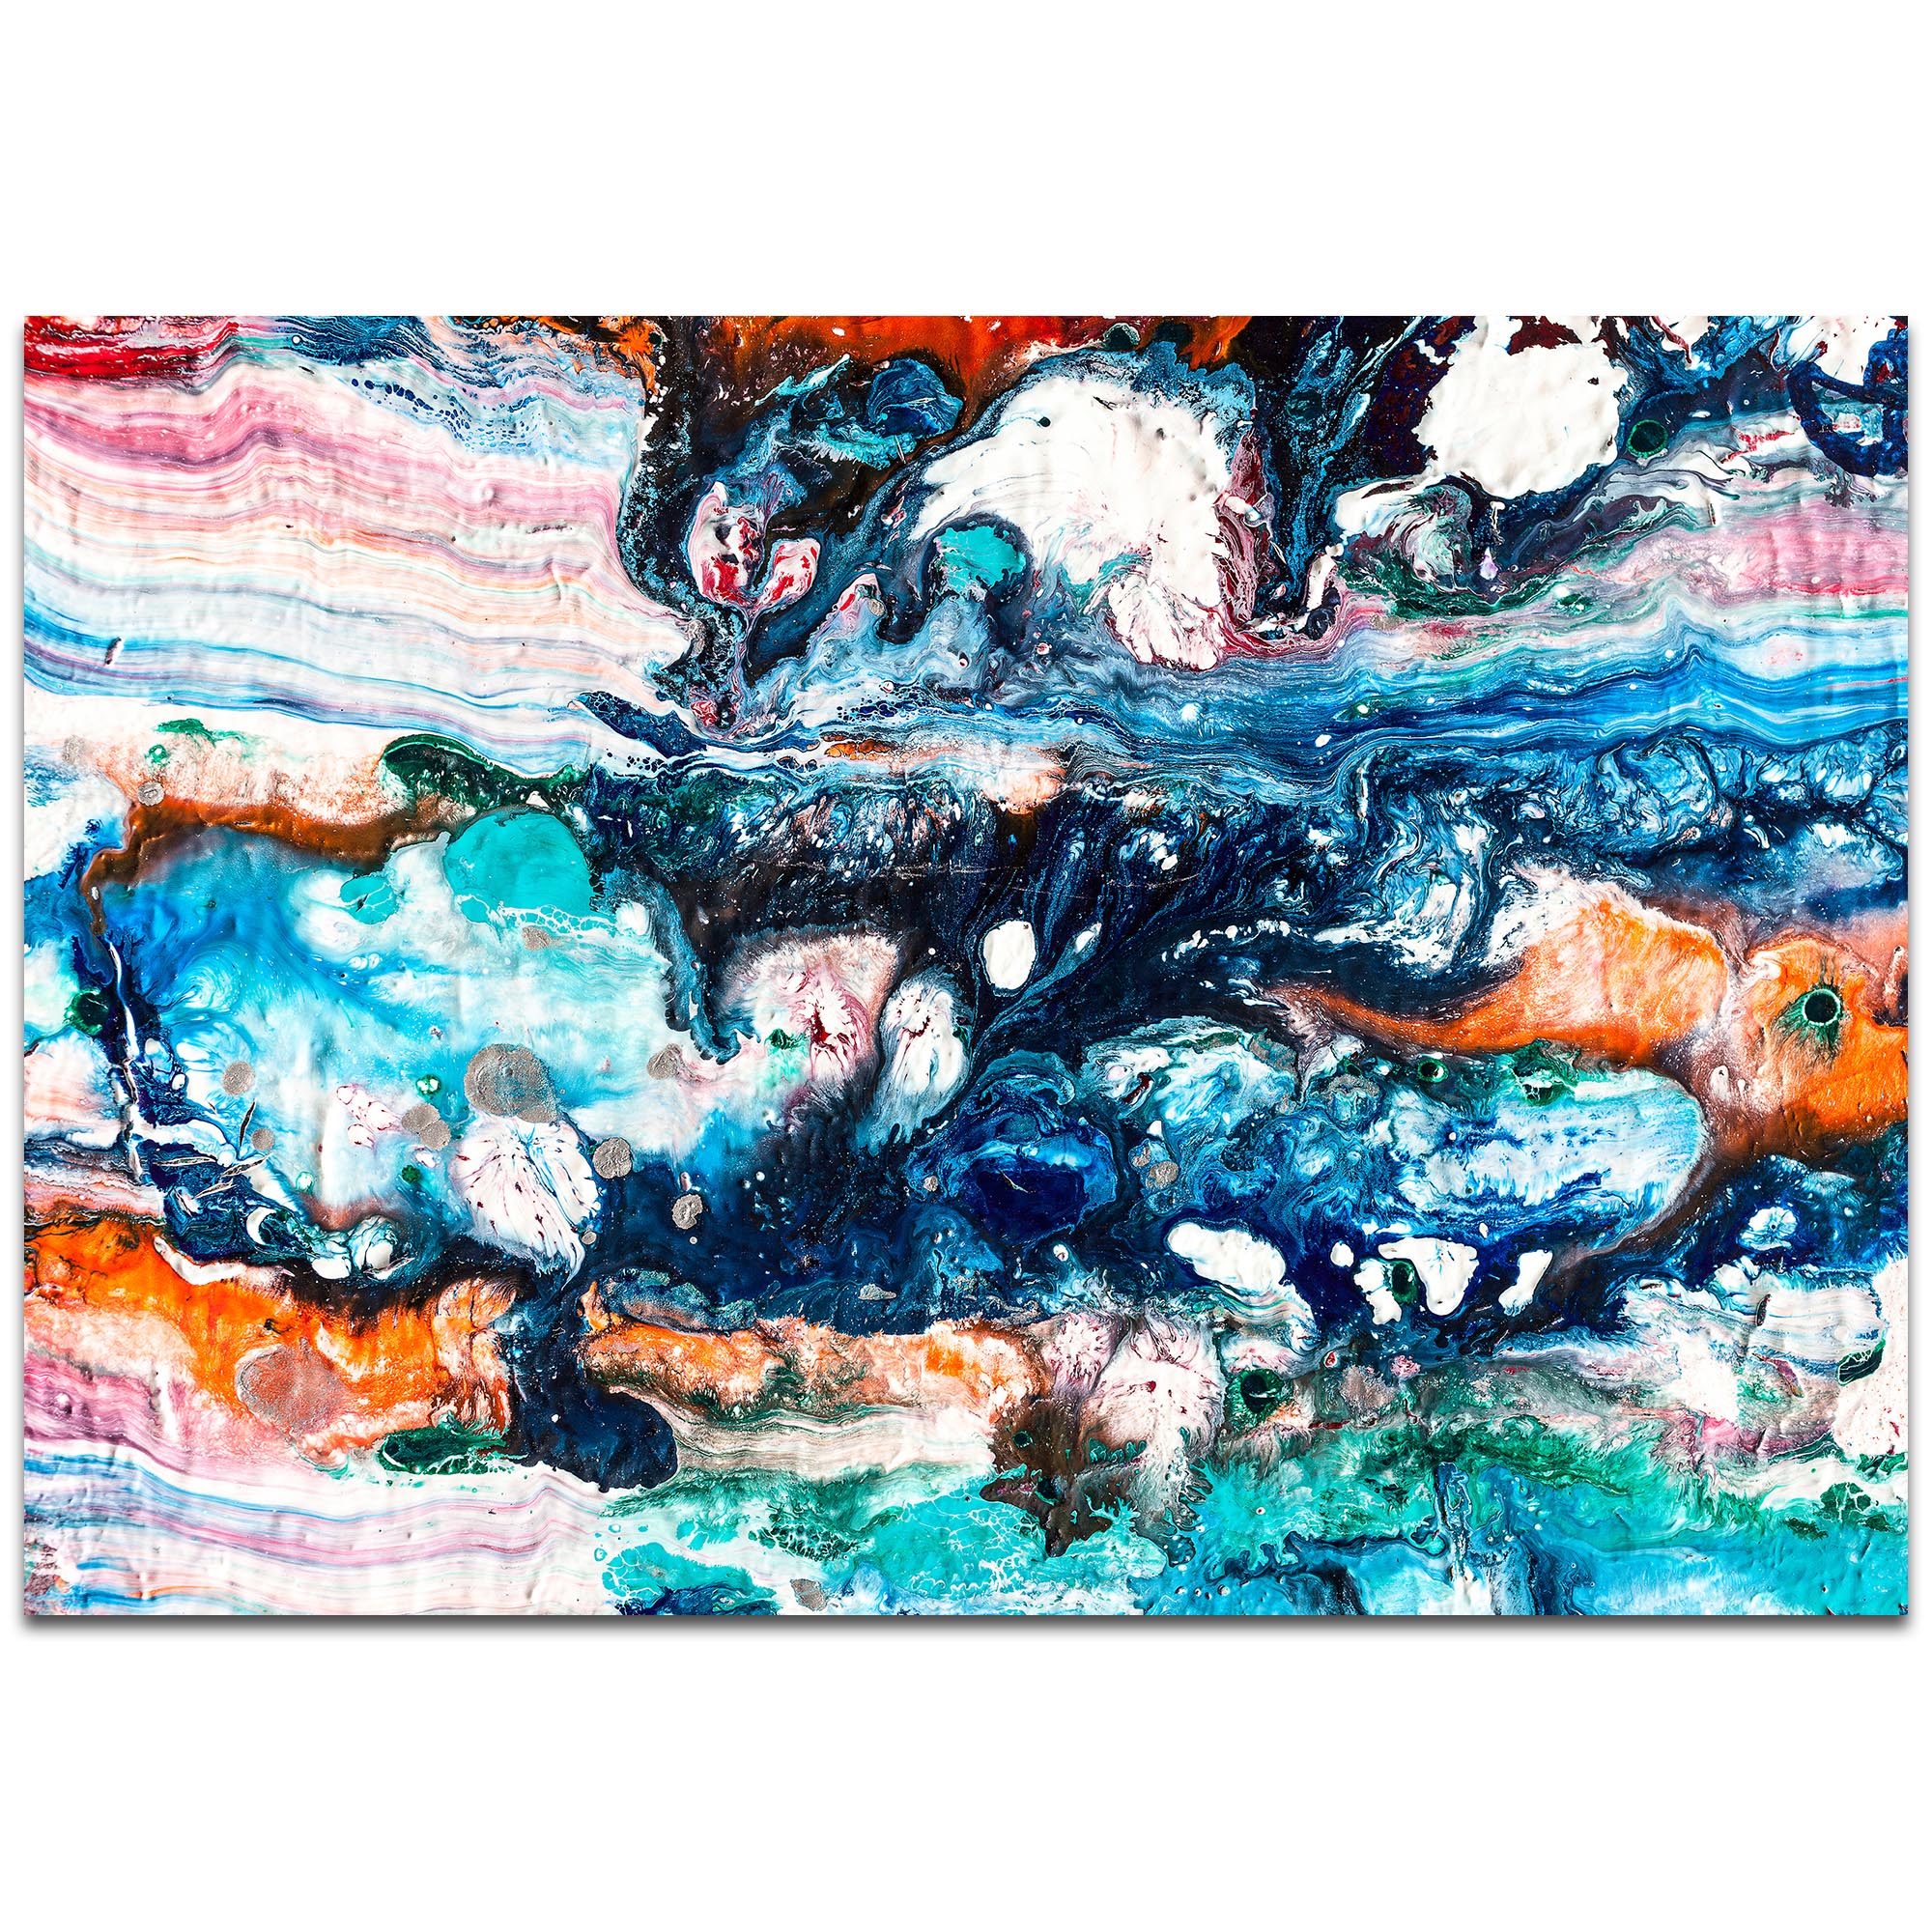 Abstract Wall Art 'Sunset On Her Breath 4' - Colorful Urban Decor on Metal or Plexiglass